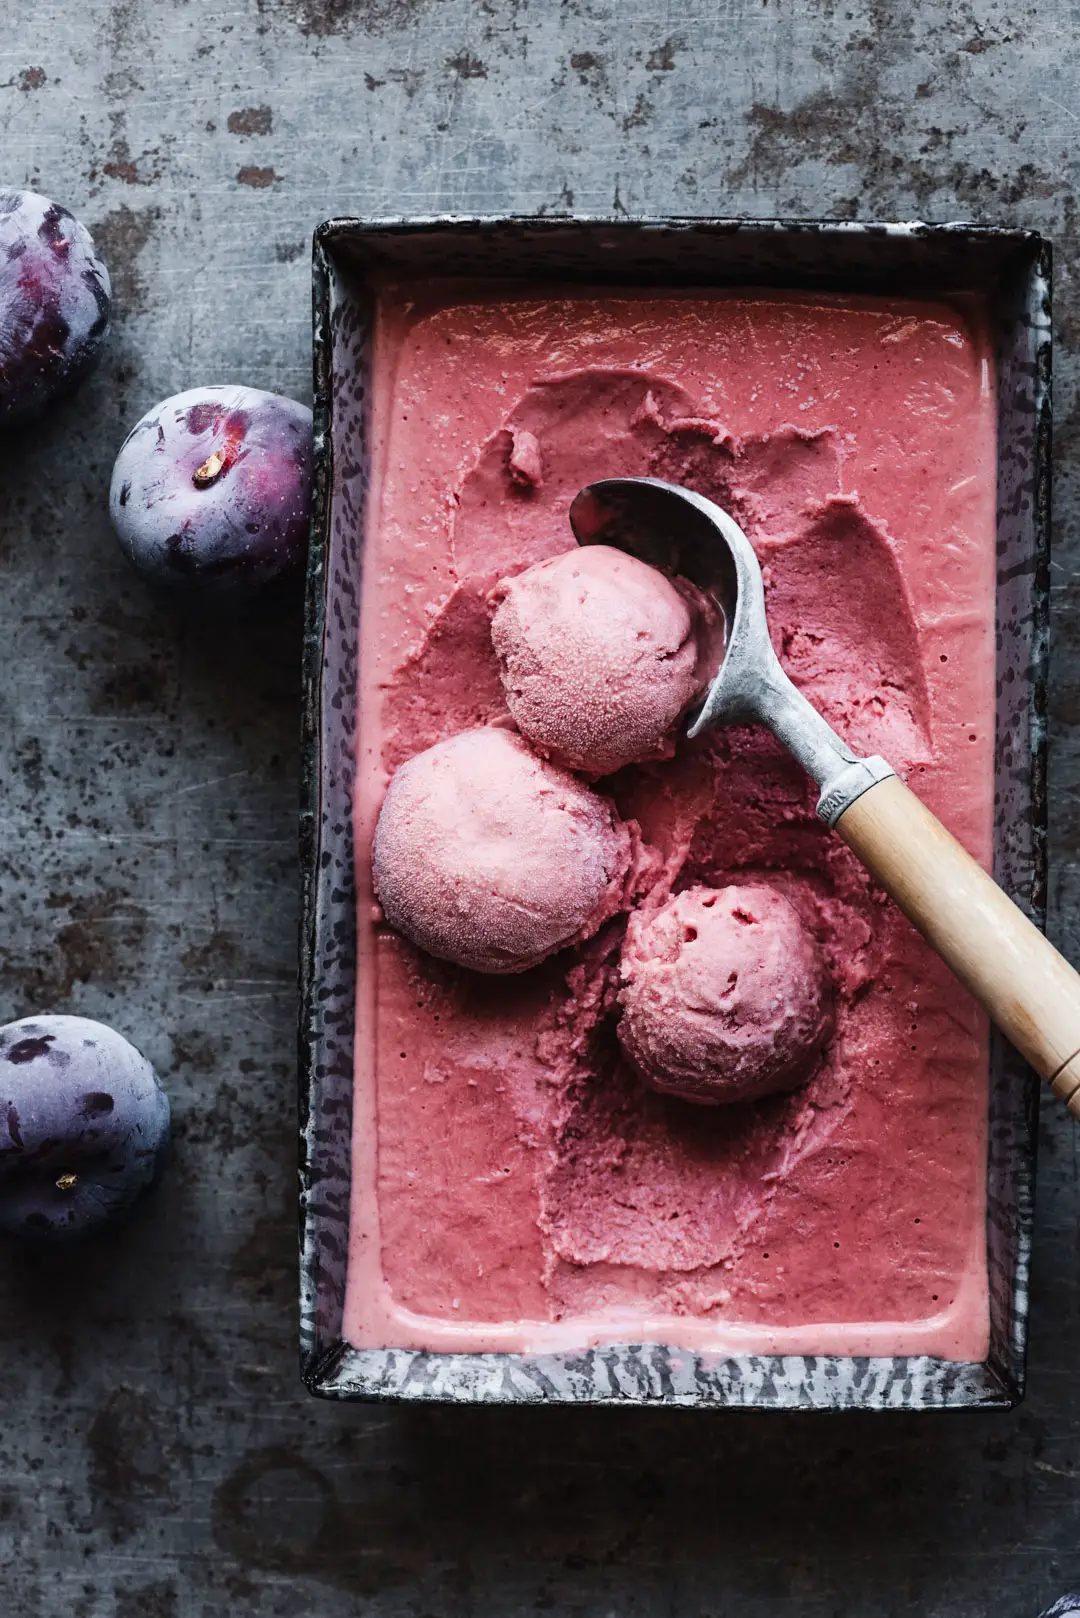 SIMPLE PLUM SHERBET - Not to be mistaken with sorbet, sherbet is a creamy frozen fruit dessert that you should be sure to enjoy this summer! This simple plum version is sweet, slightly tart, perfectly creamy and can be made without an ice cream maker!